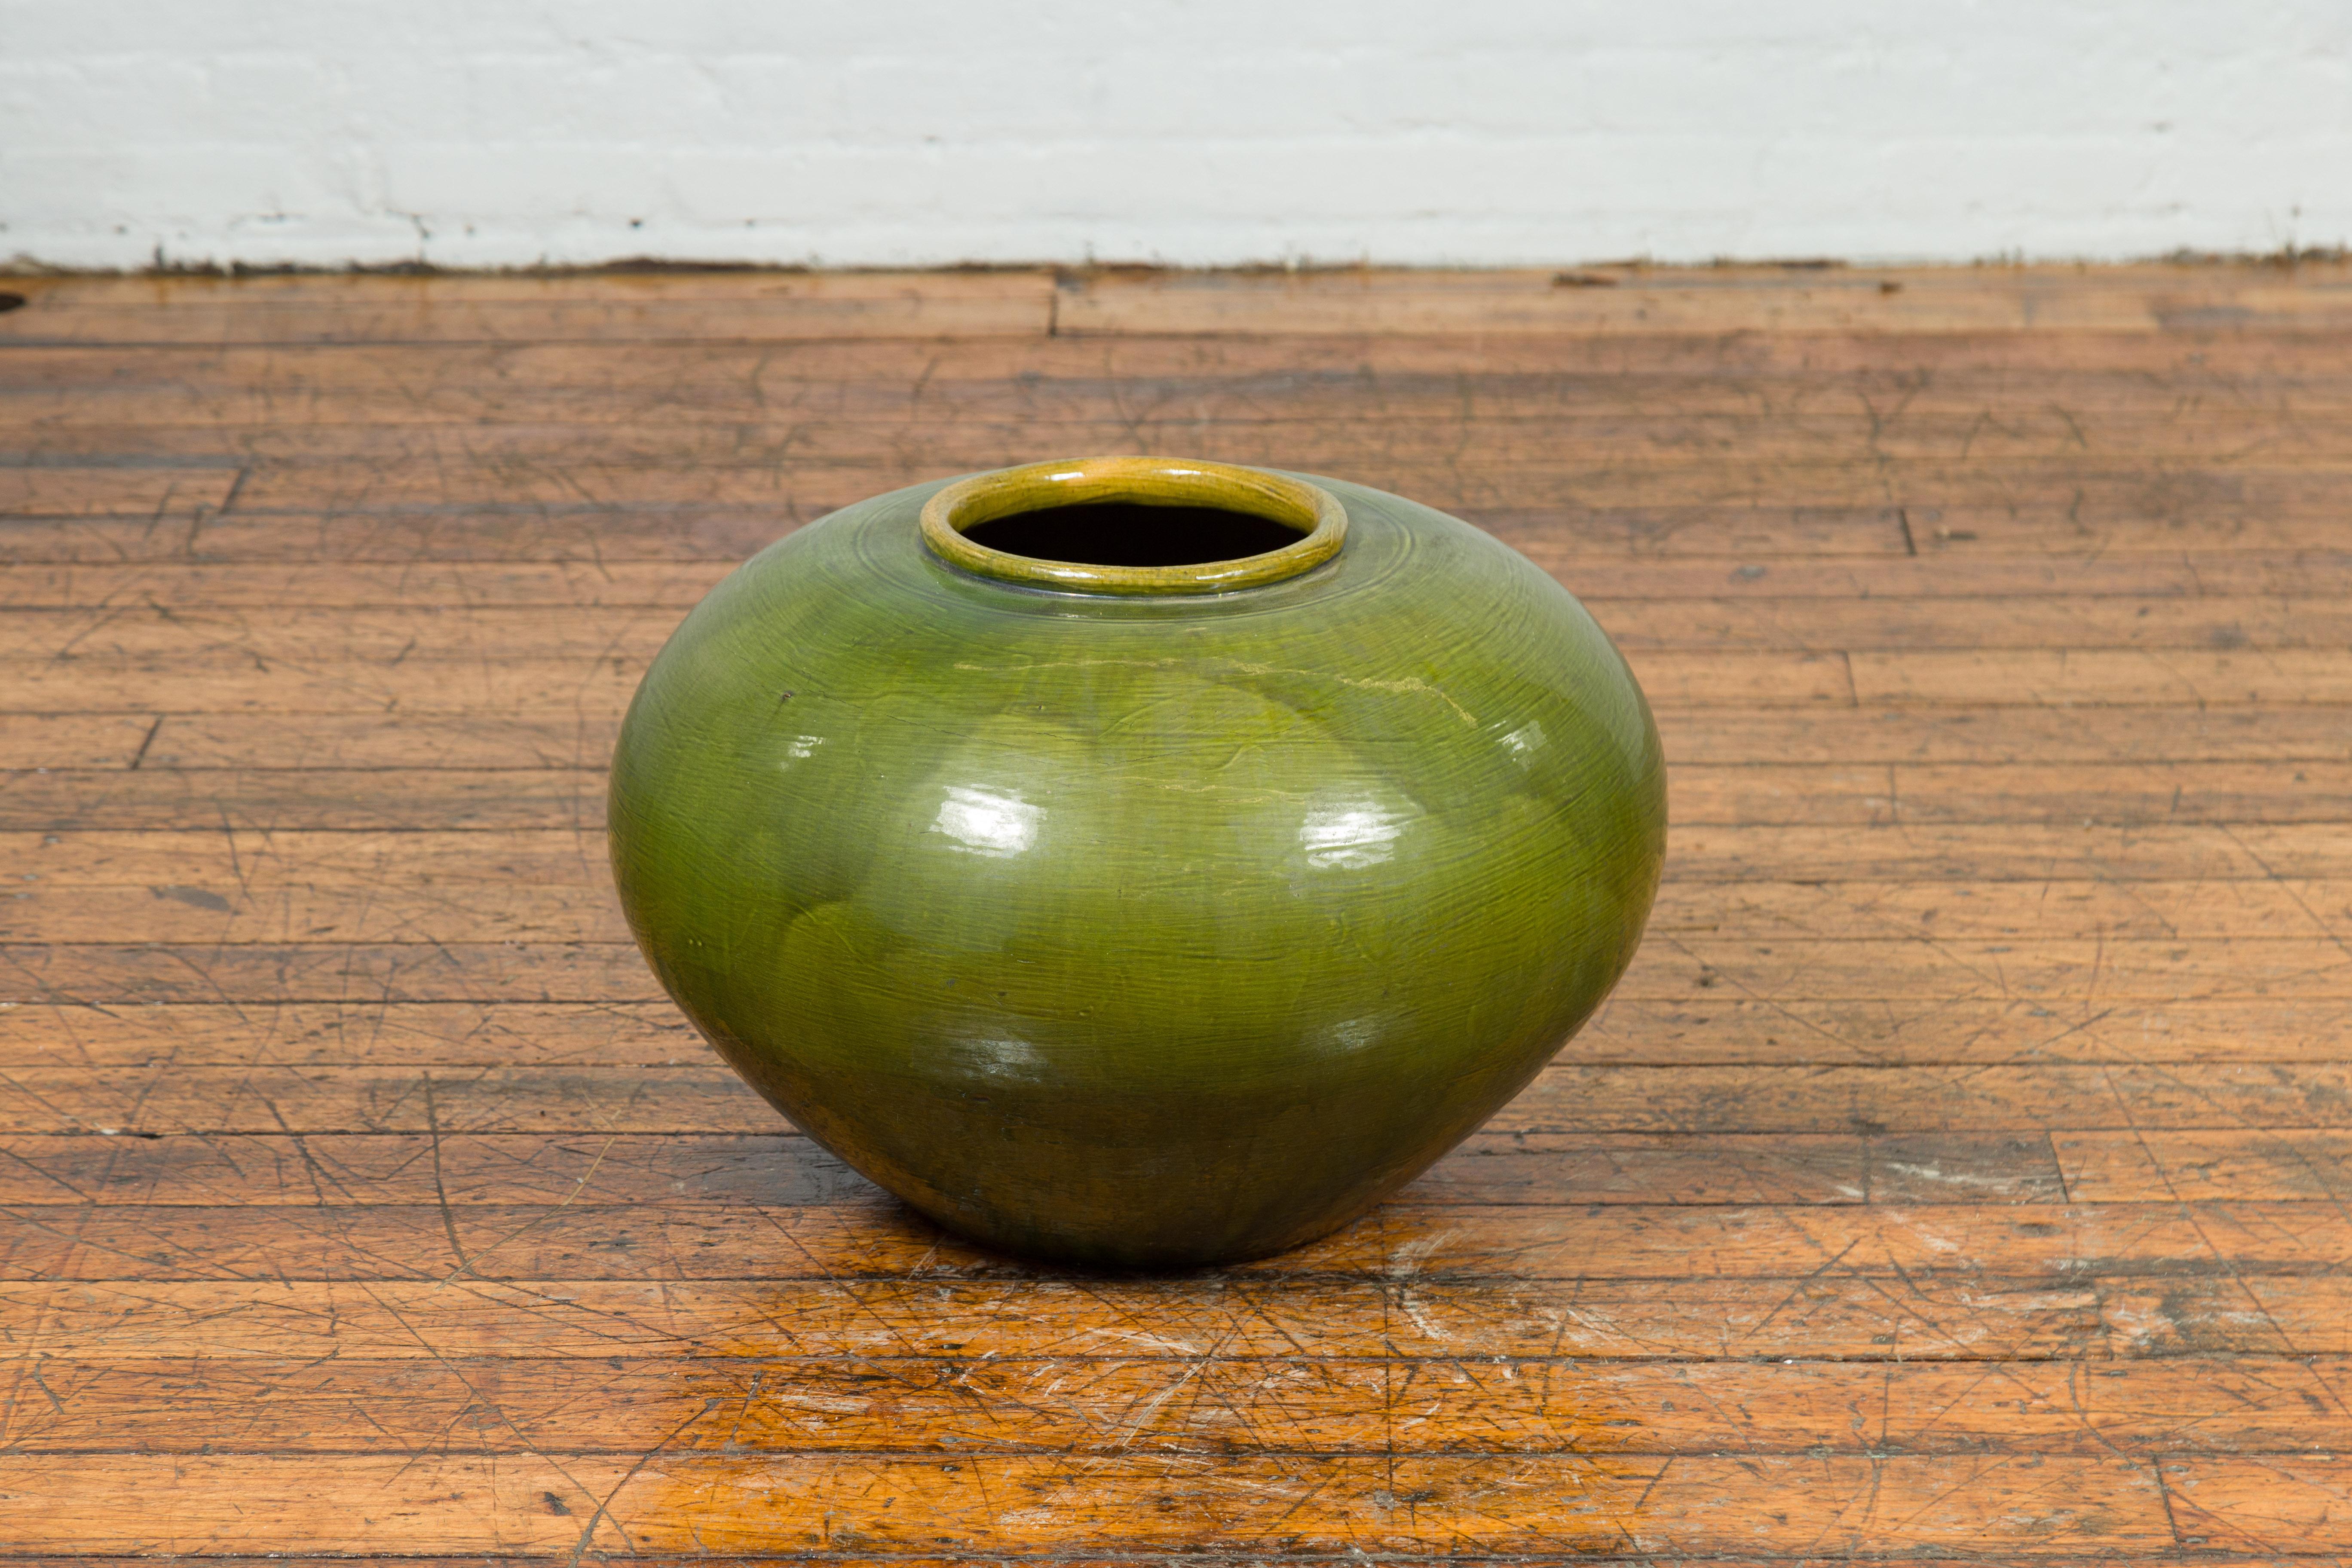 A Chinese contemporary olive green round urn with porcelain glaze. Created in China, this circular urn features a small lip topping a generous round body. Adorned with an olive green glaze with darker accents, this contemporary urn will bring a